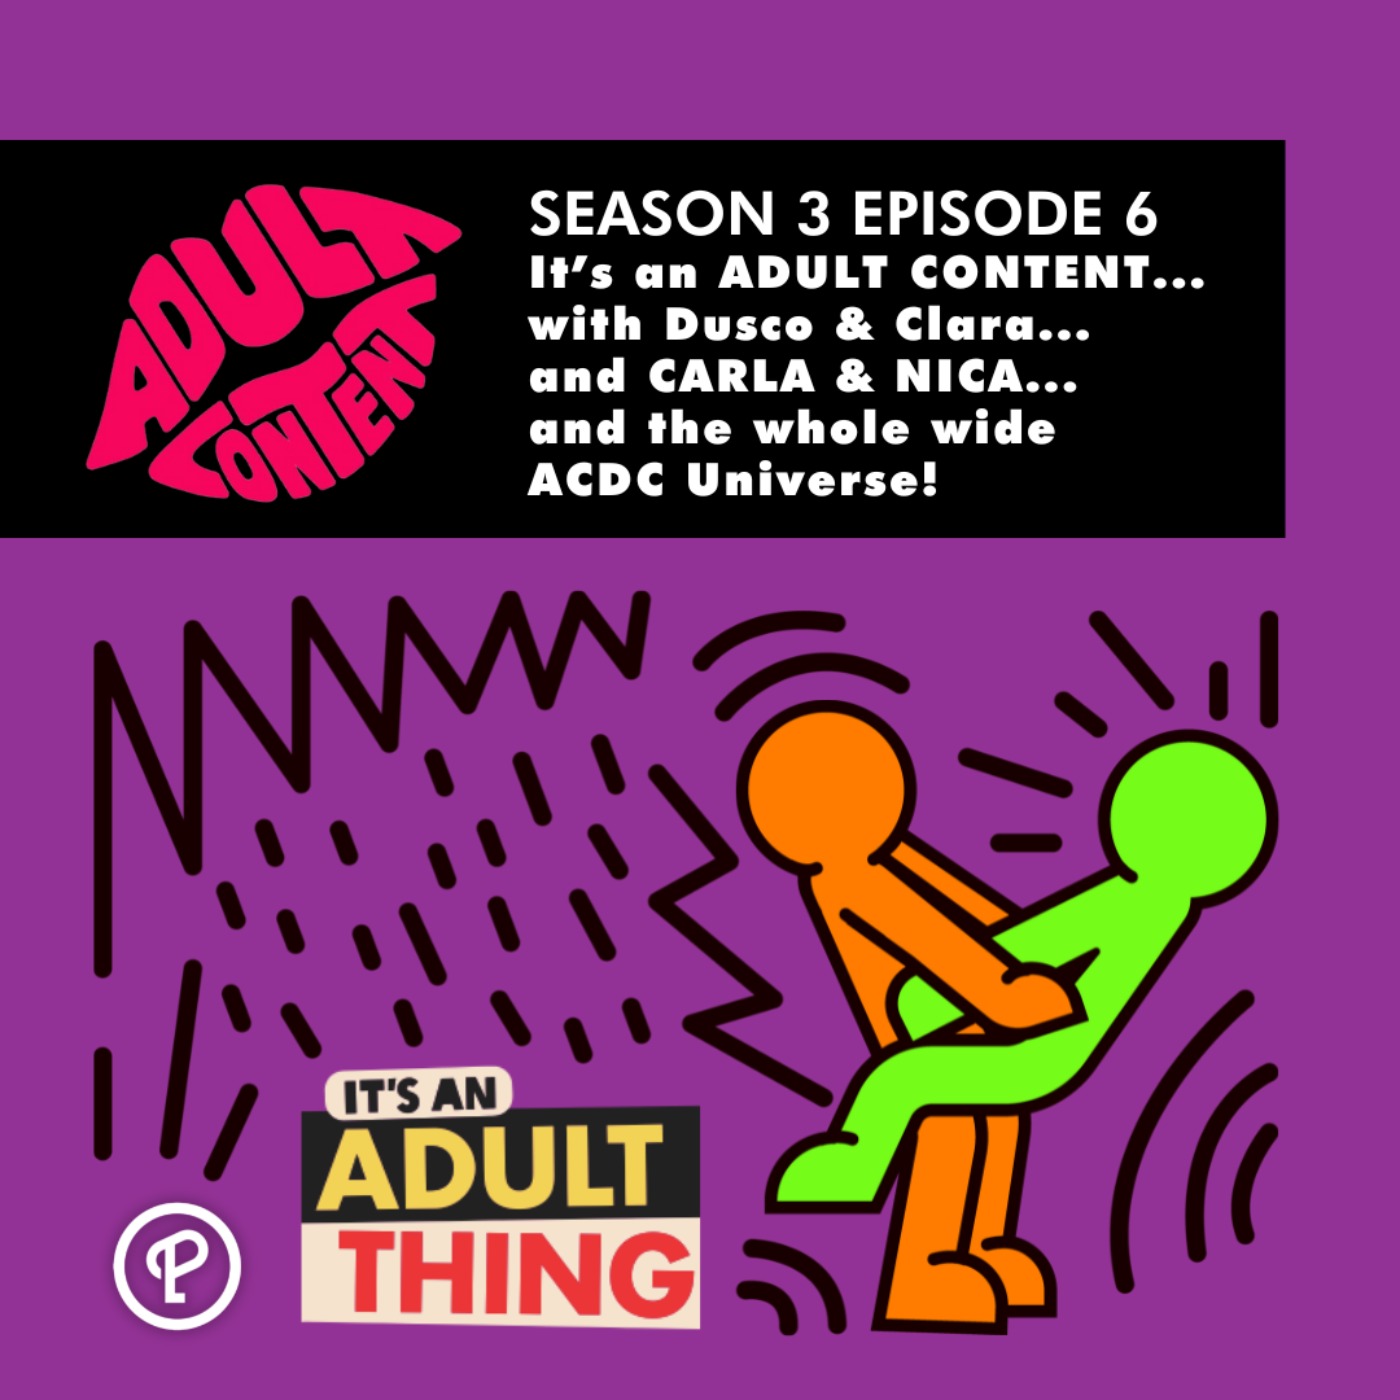 S3E6: It’s an ADULT CONTENT ... with Dusco & Clara ... and CARLA & NICA ... and the whole wide ACDC Universe!